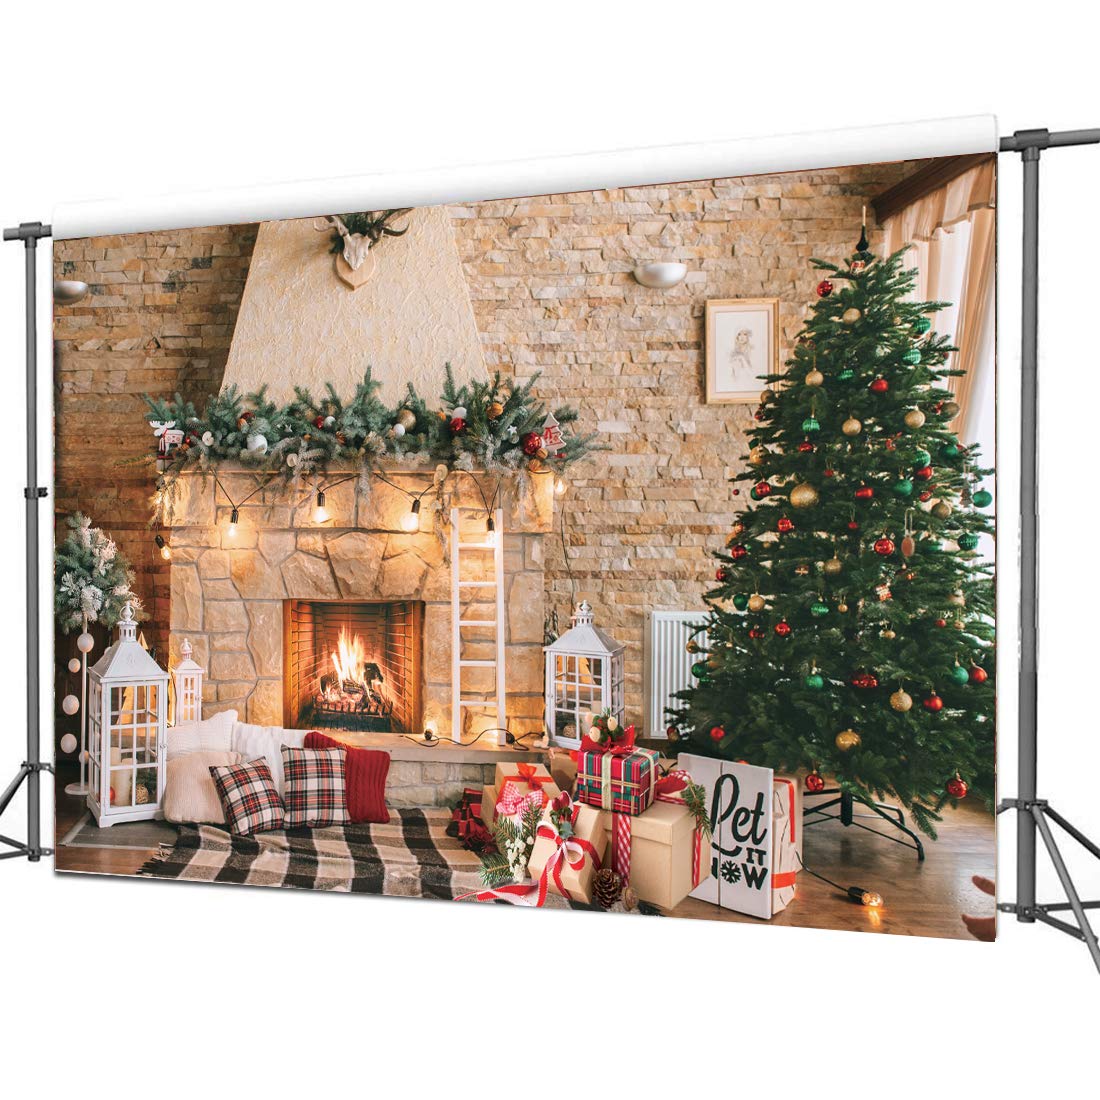 Dudaacvt 8x6ft Christmas Fireplace Theme Backdrop for Photography Christmas Photography Backdrop Merry Xmas Sock Gift Decorations Family Party Party Su pplies Banner Booth Props D470